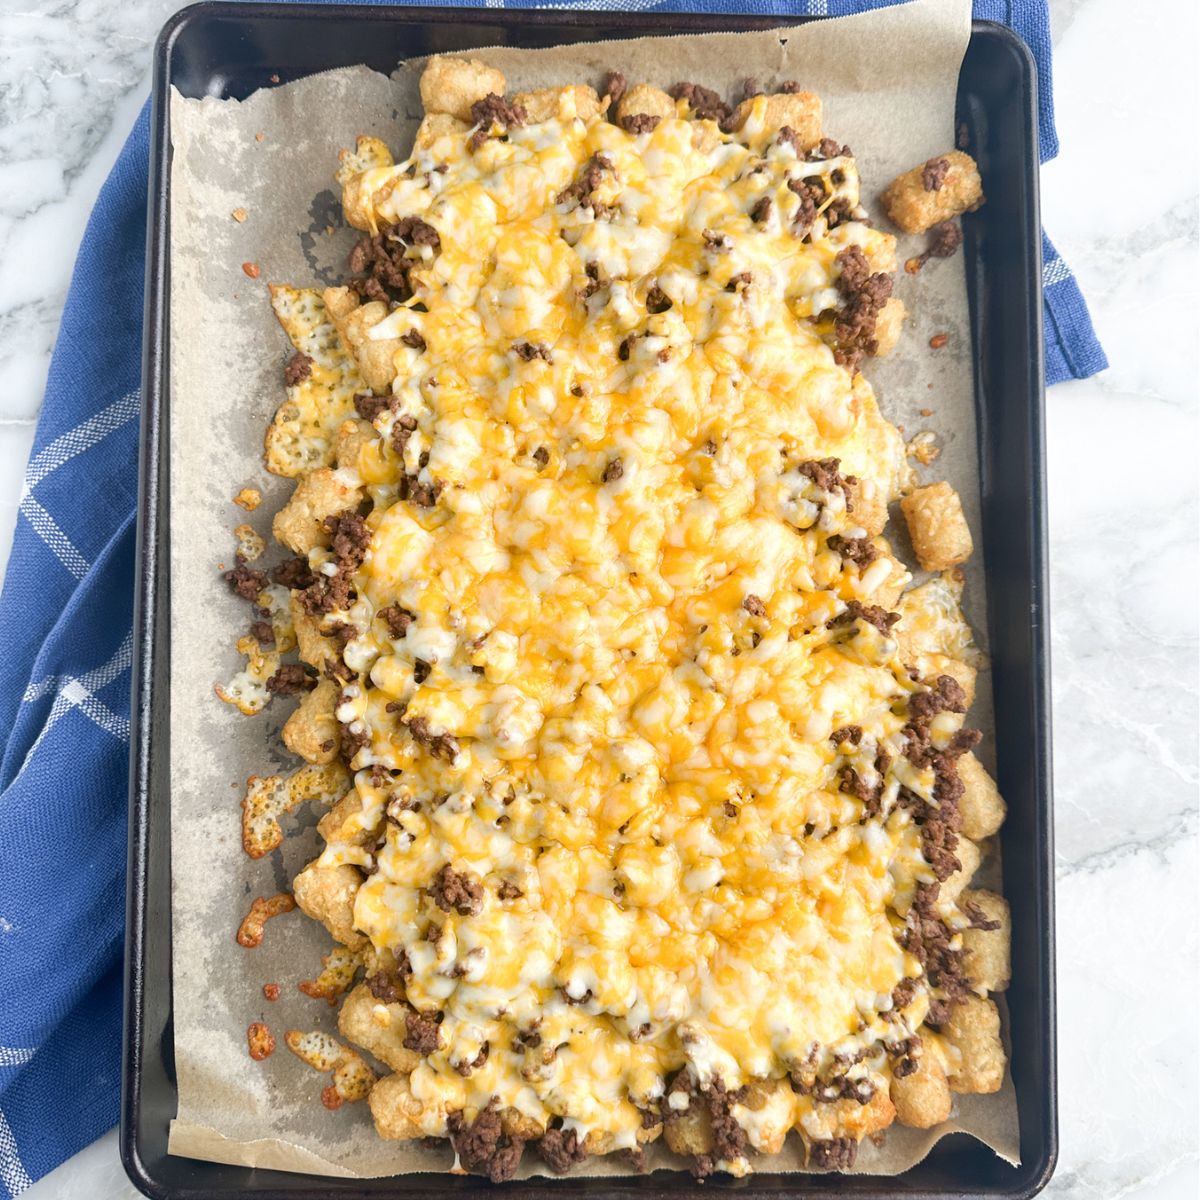 Baking sheet with tater tots, ground beef, and melted cheese. 